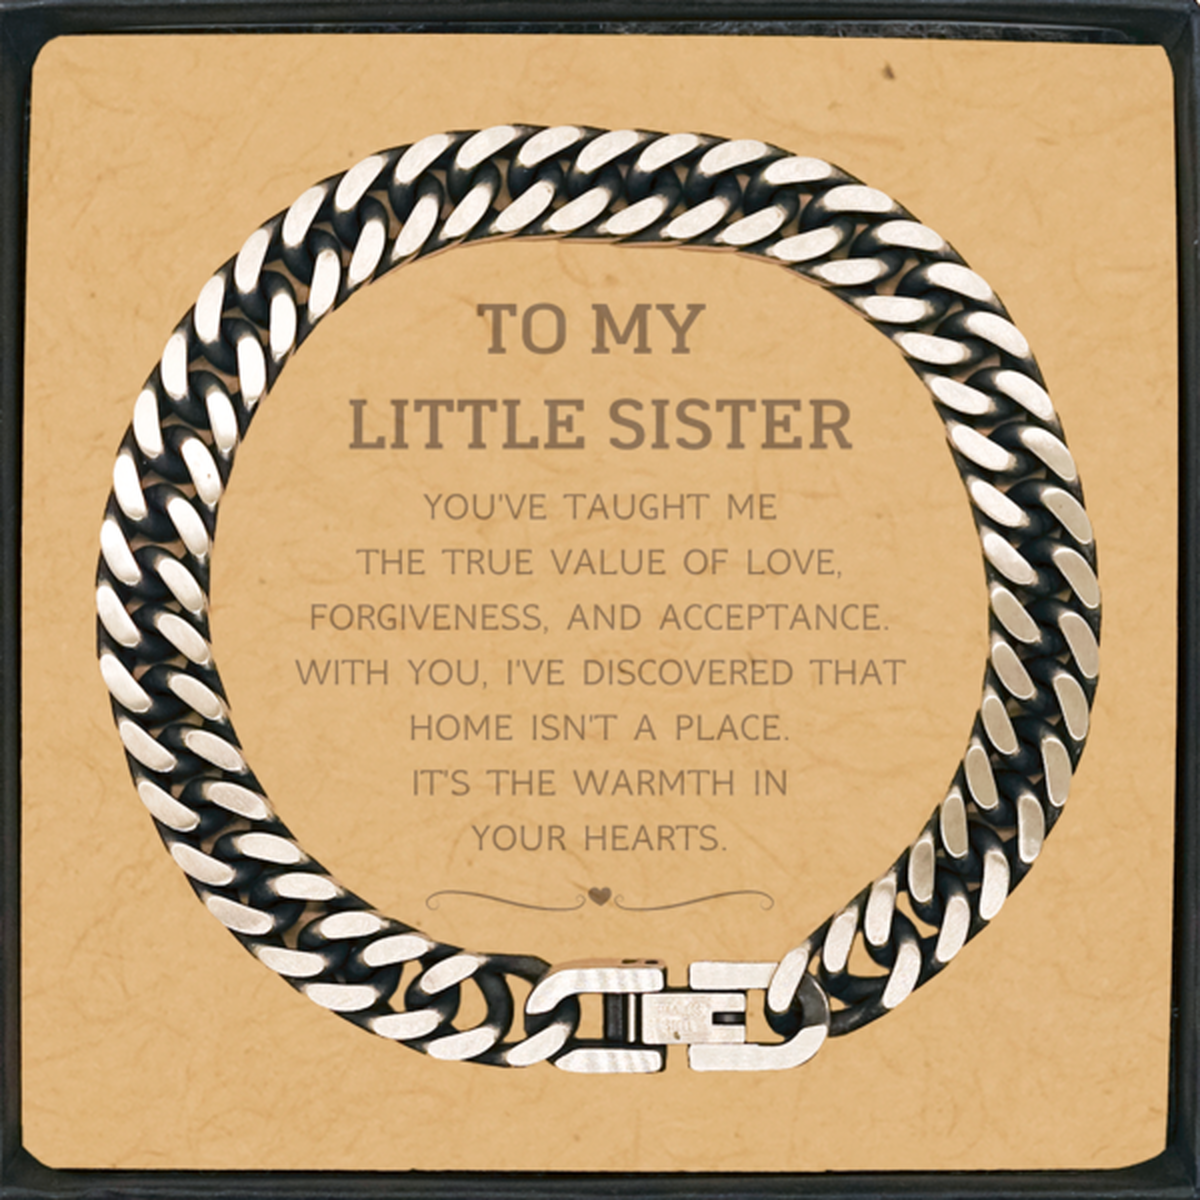 To My Little Sister Gifts, You've taught me the true value of love, Thank You Gifts For Little Sister, Birthday Cuban Link Chain Bracelet For Little Sister